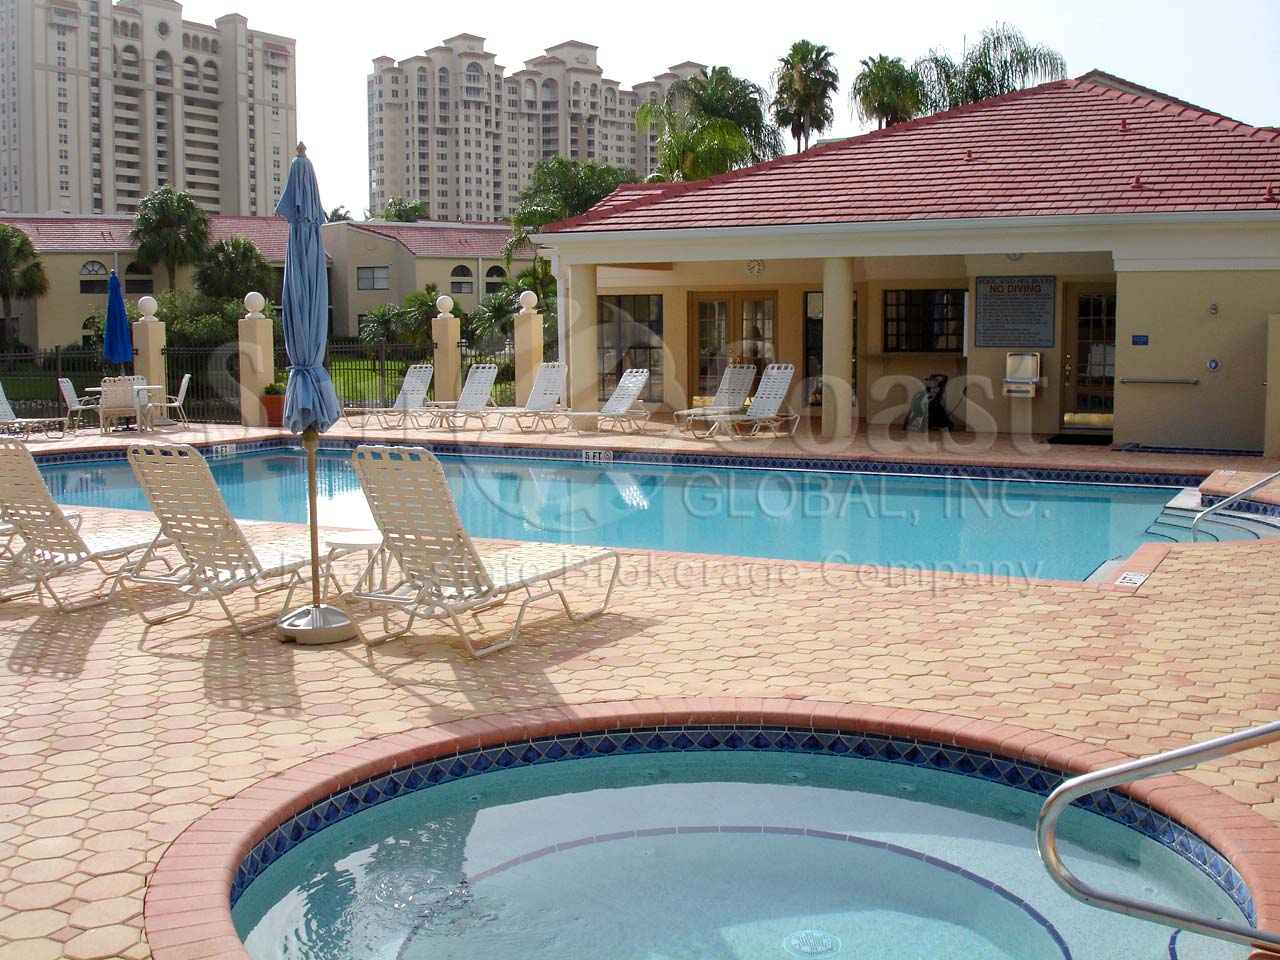 Valencia at Pelican Bay Community Hot Tub, Pool and Clubhouse